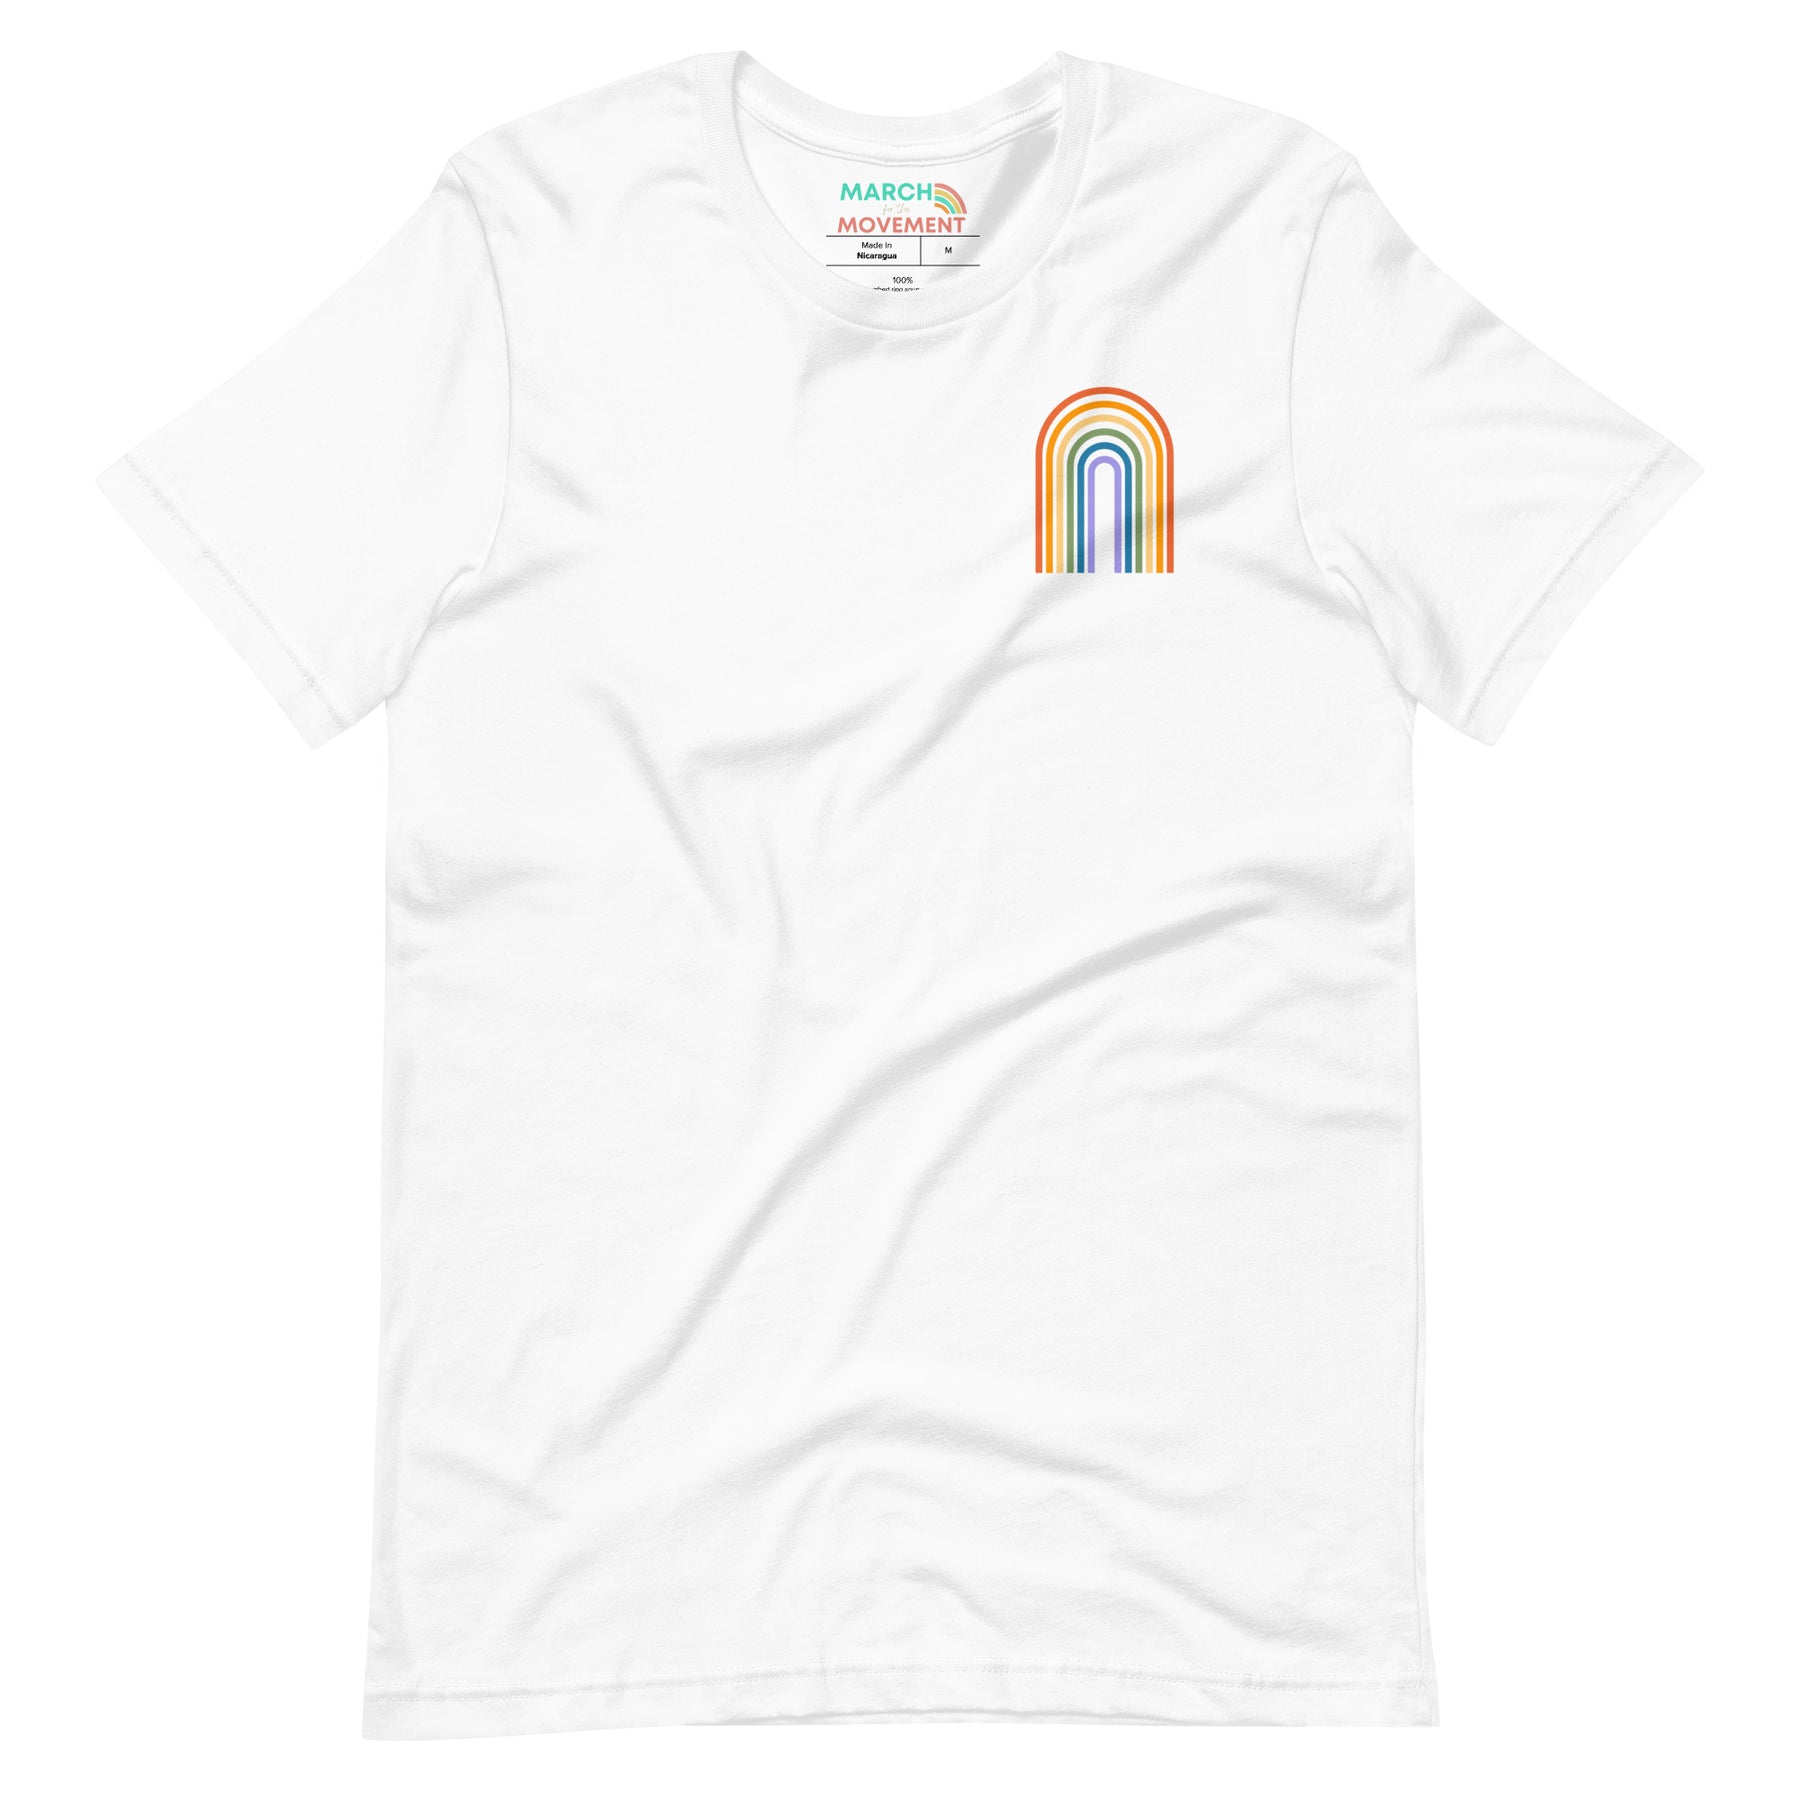 Love is Love Retro T-Shirt Front and Back Design